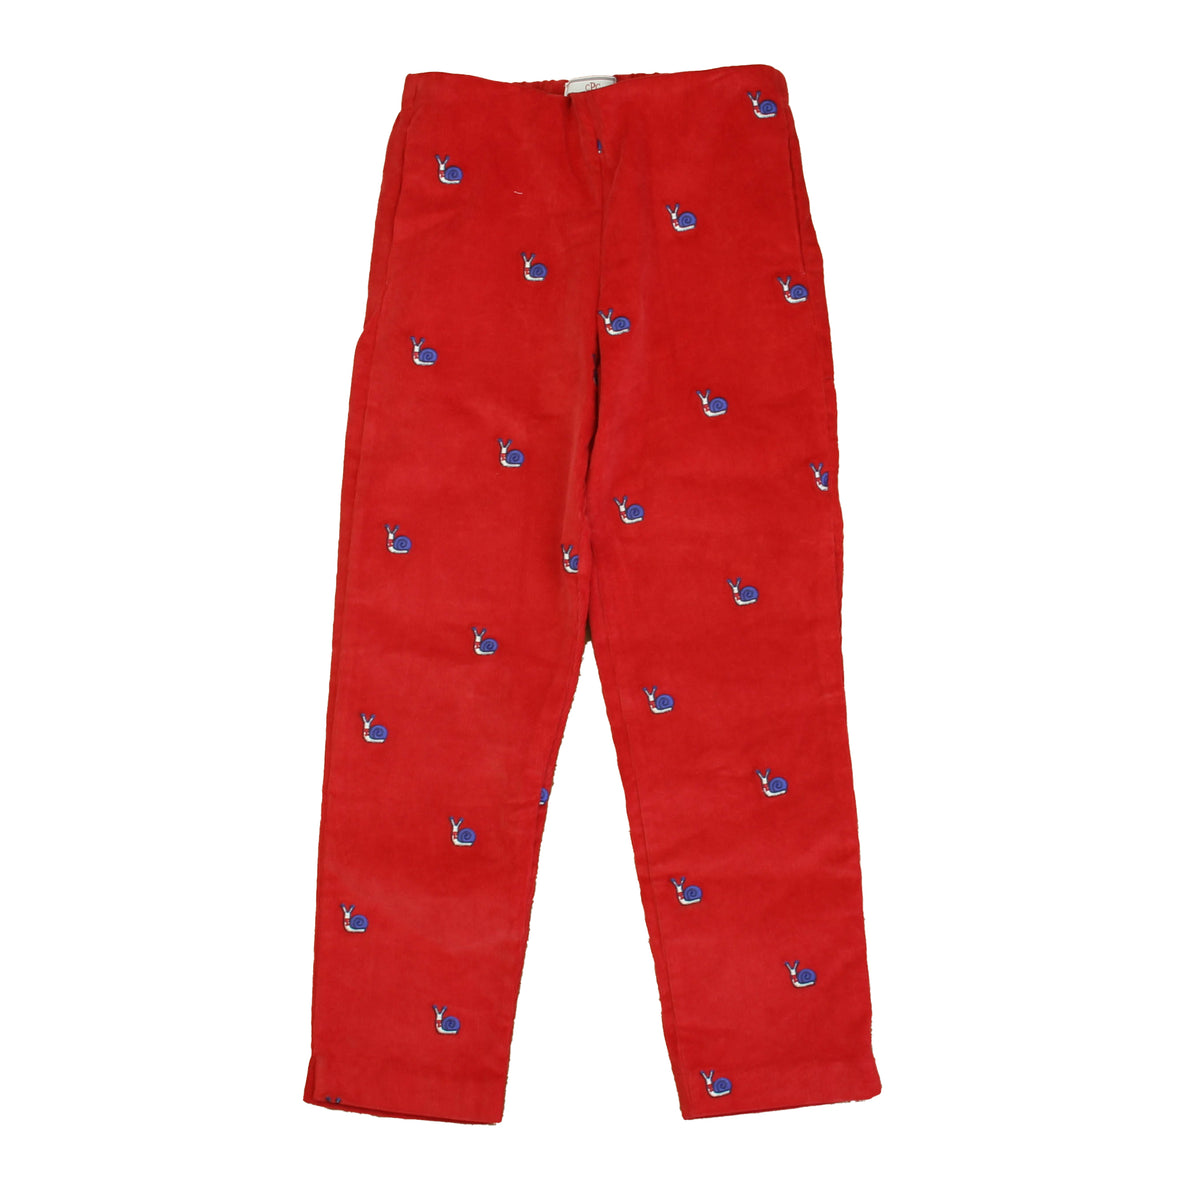 New with Tags: Red Snail Embroidery Pants size: 7 Years -- FINAL SALE